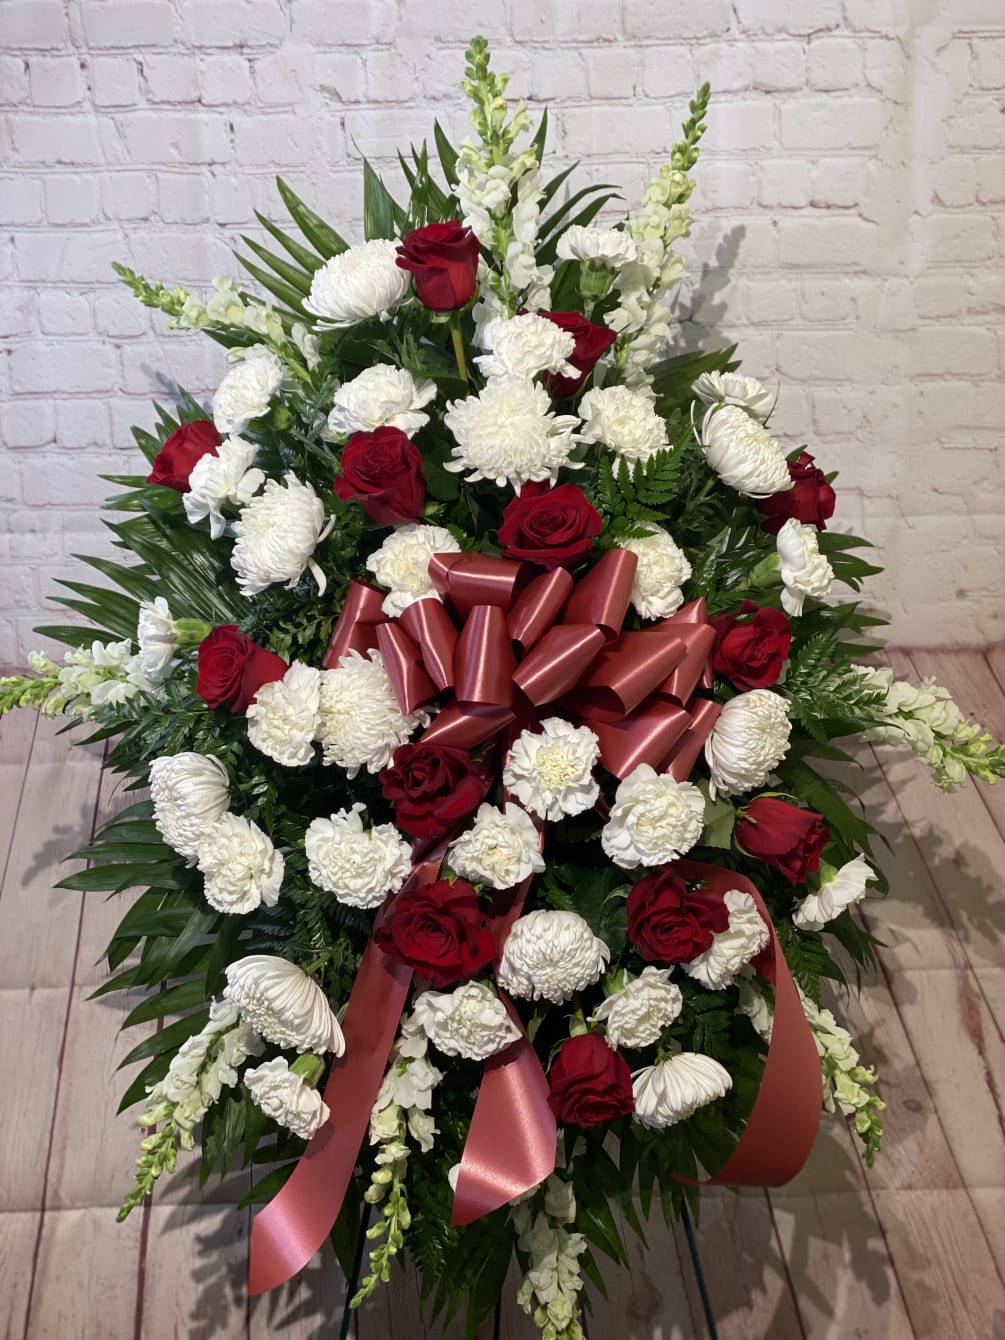 Honor your loved one with an impressive red and white display.

Including over